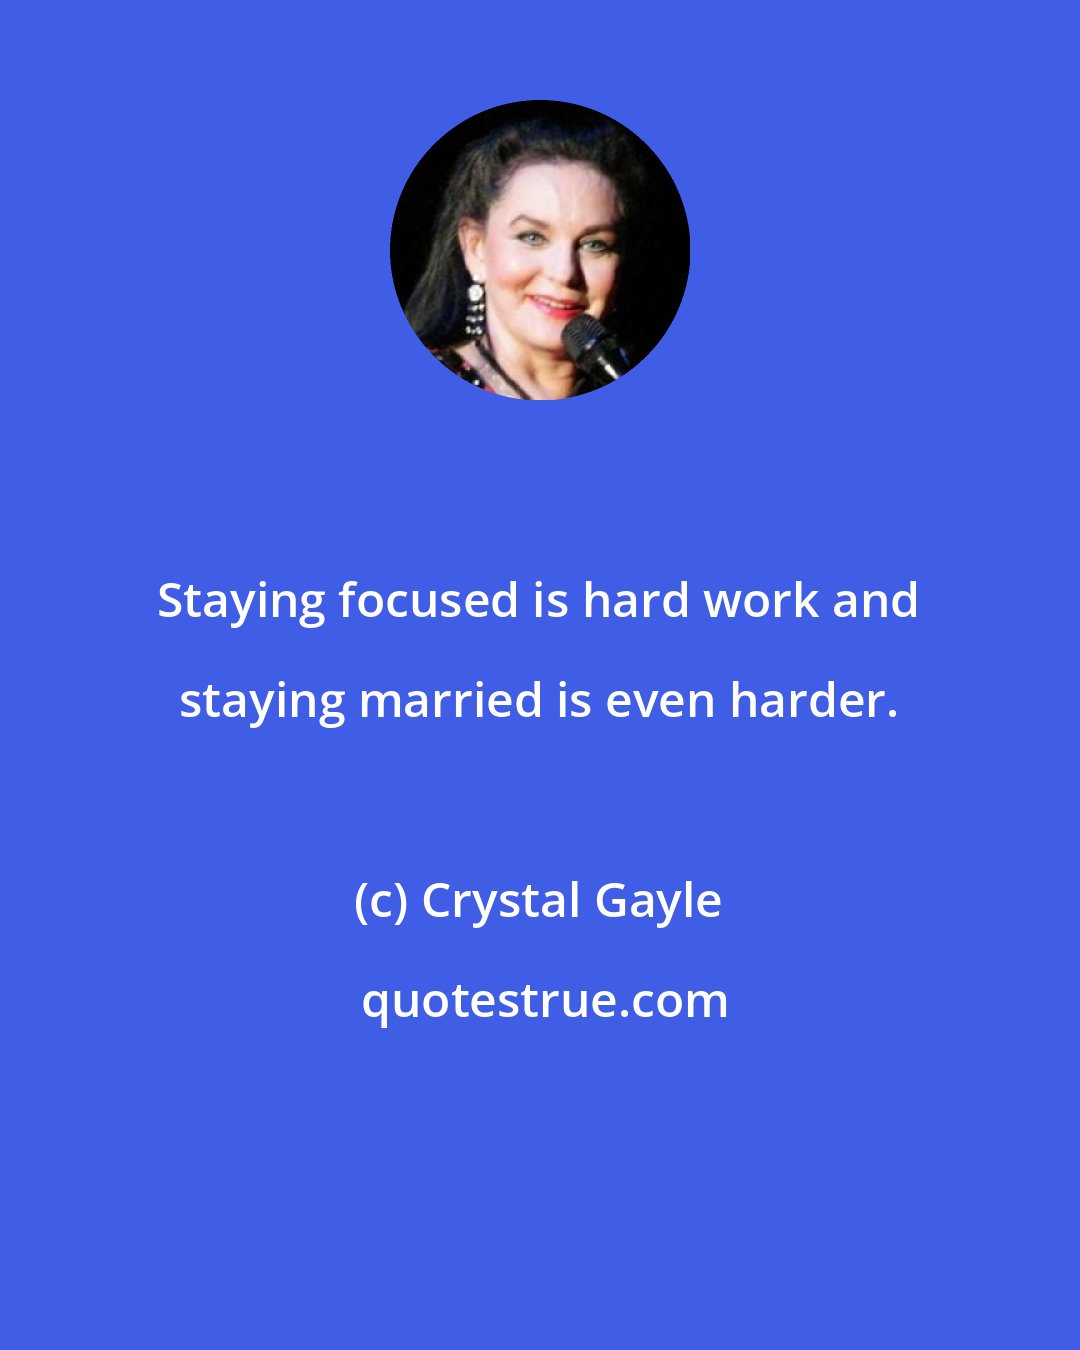 Crystal Gayle: Staying focused is hard work and staying married is even harder.